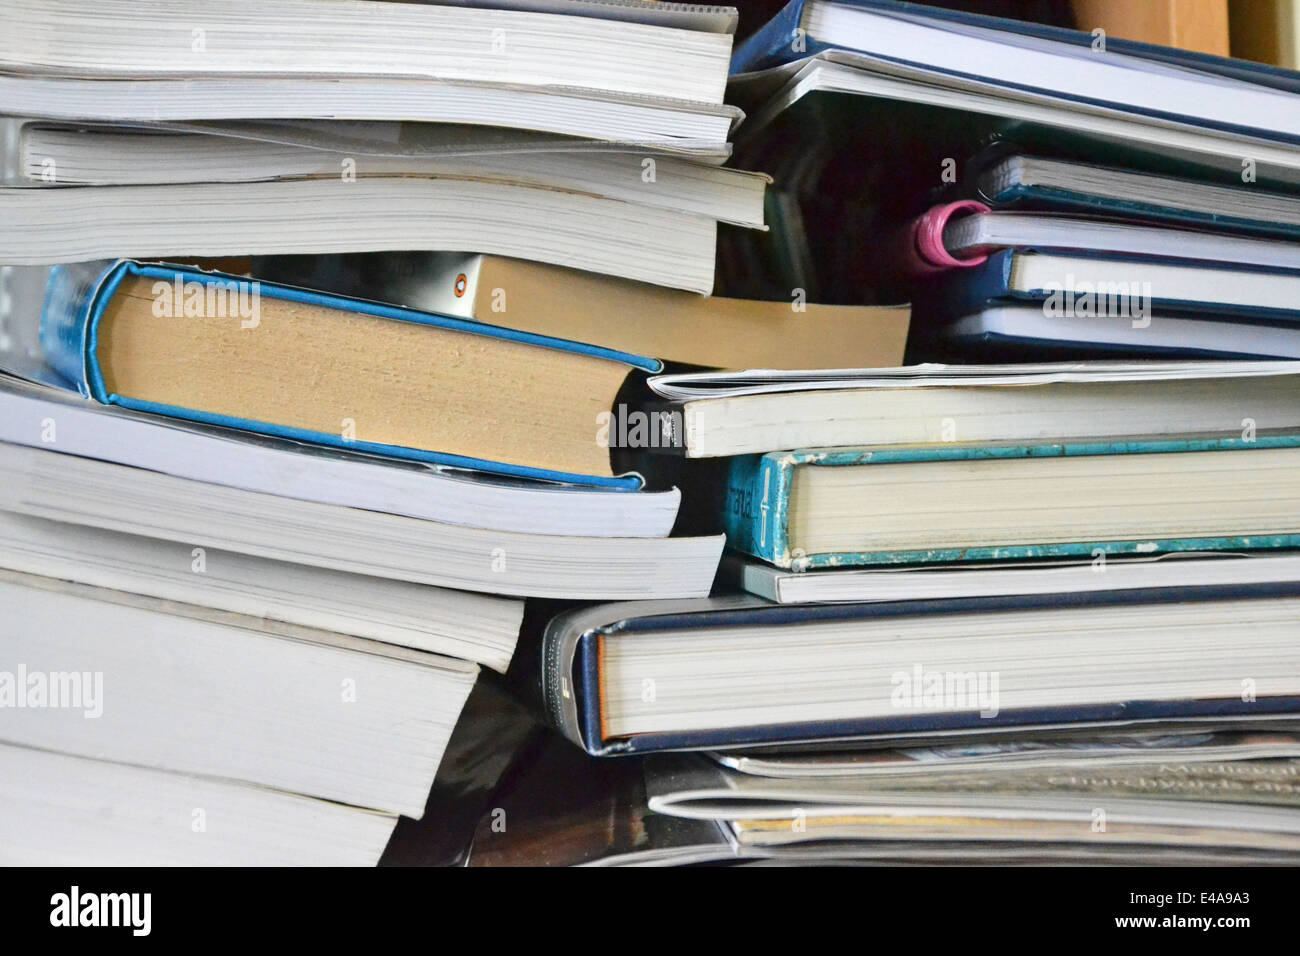 close up of books and journals piled up Stock Photo